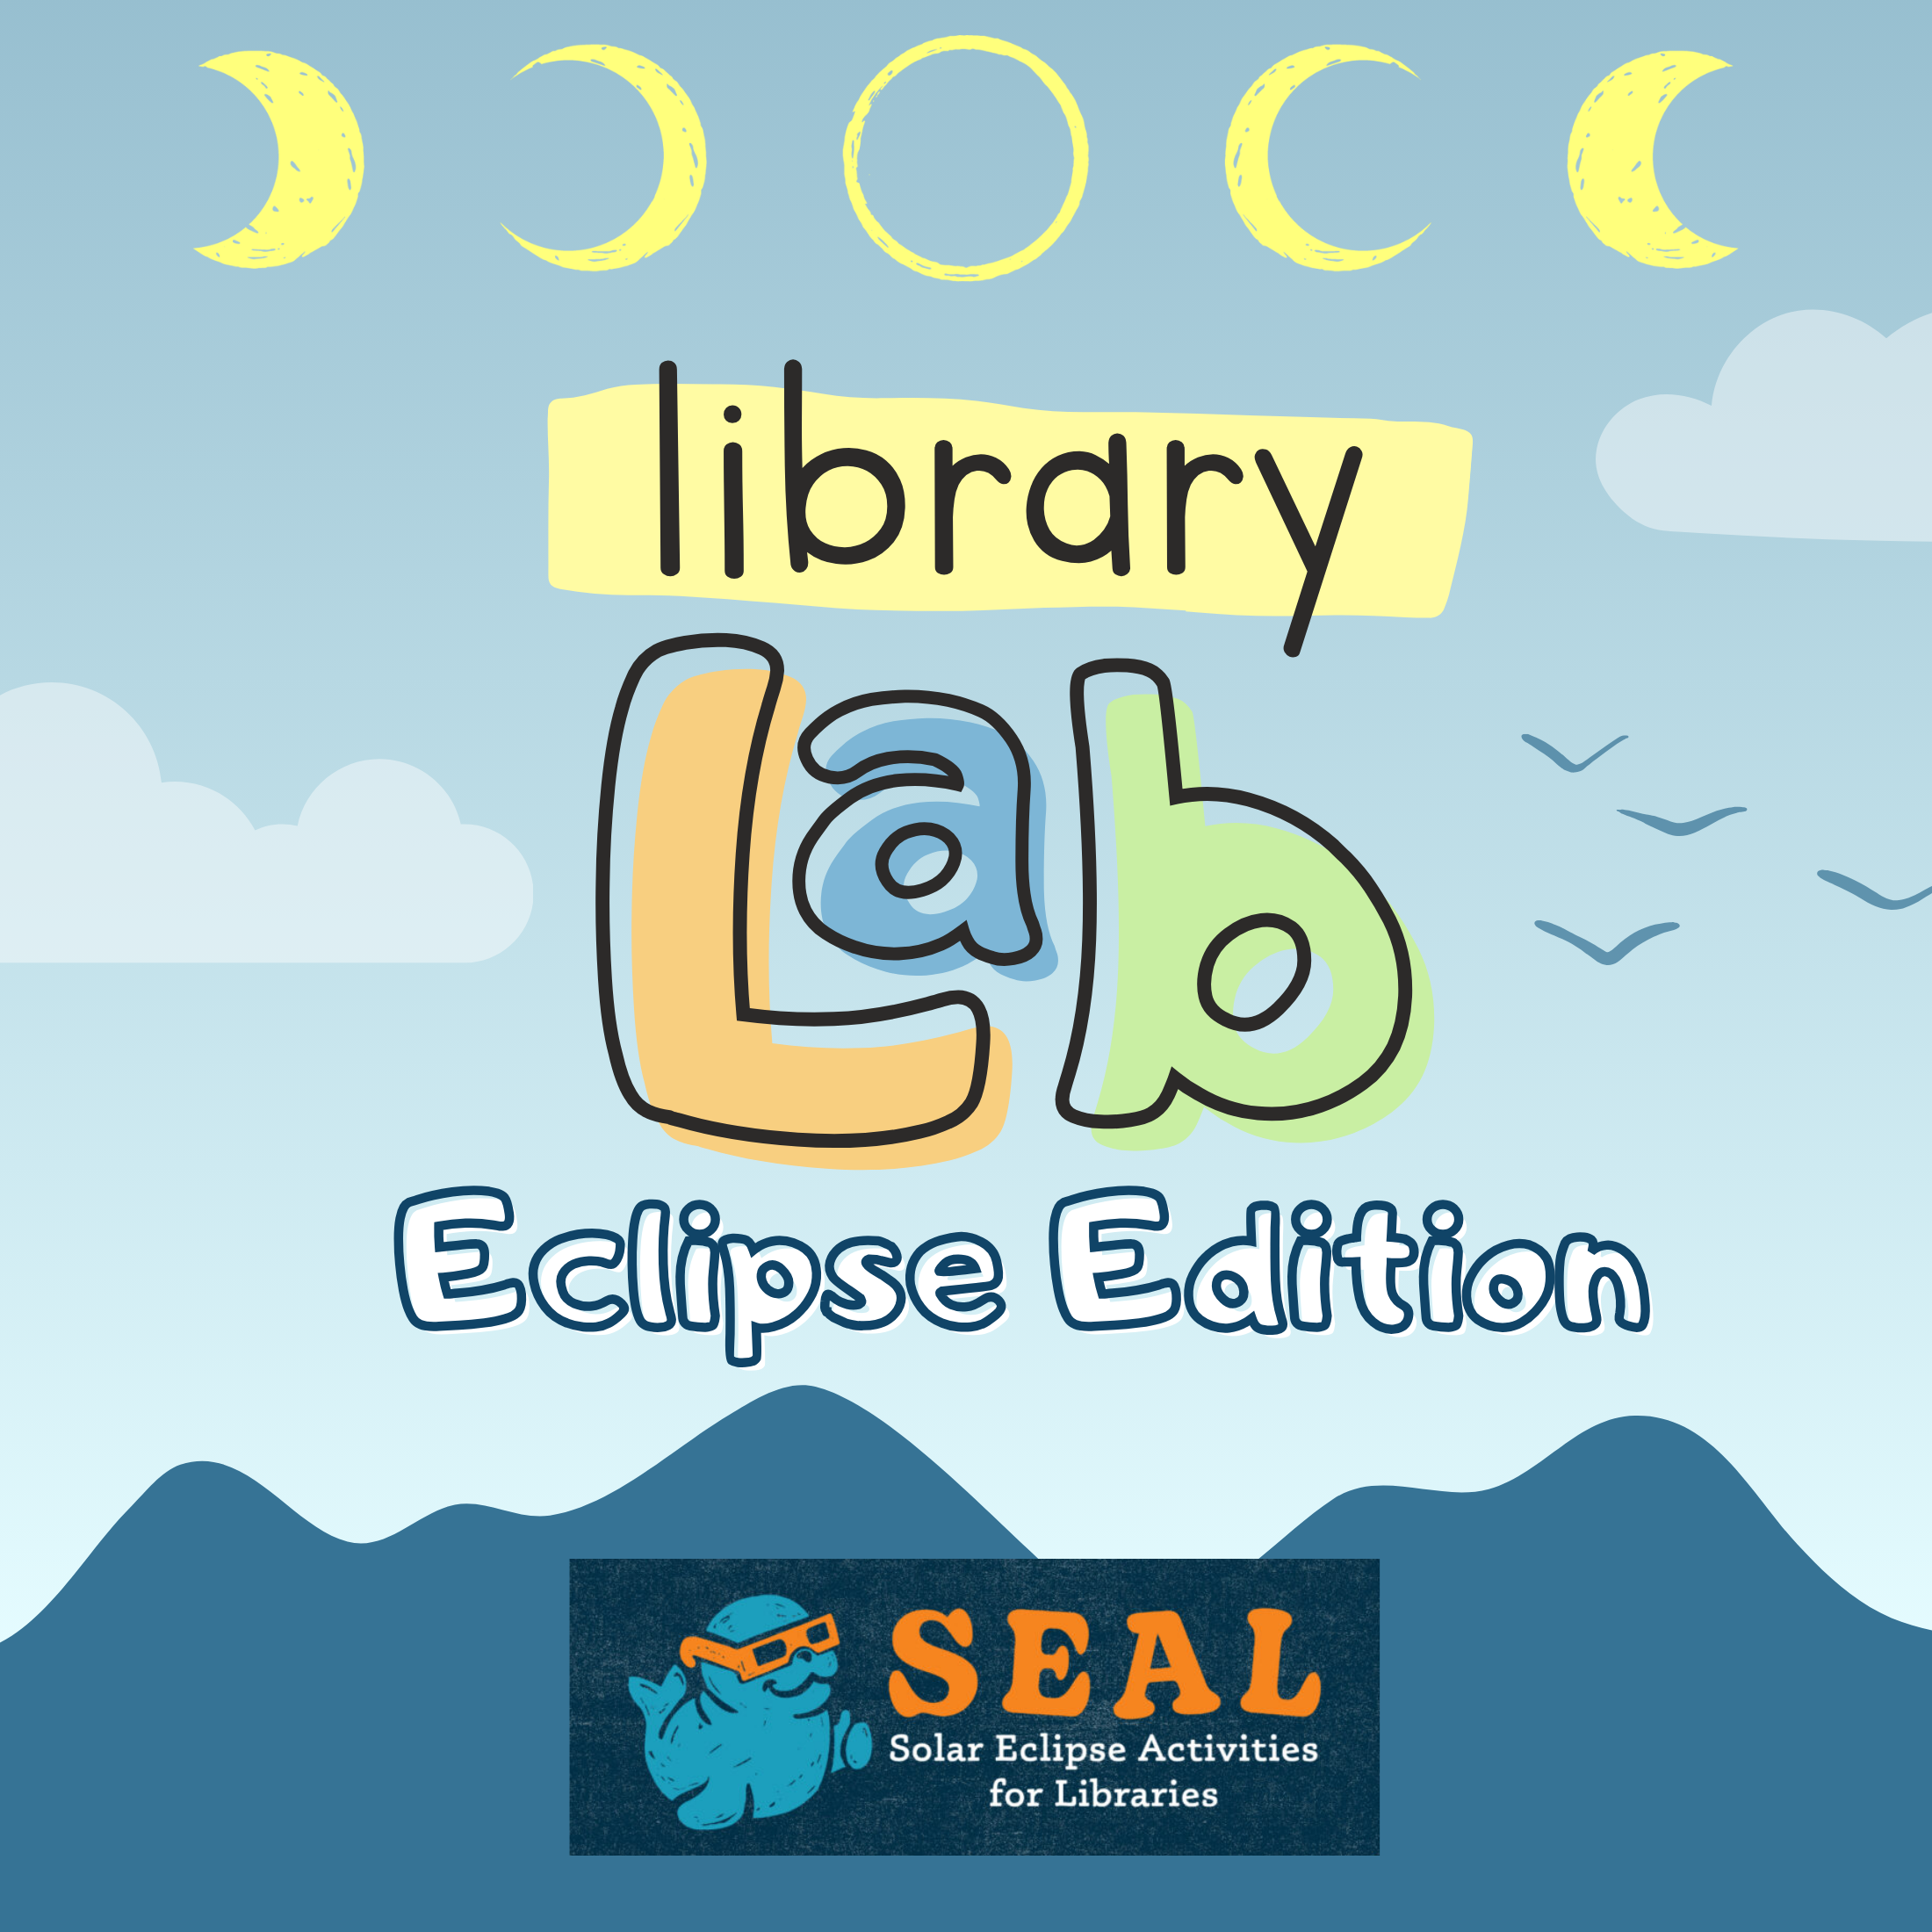 library lab eclipse edition